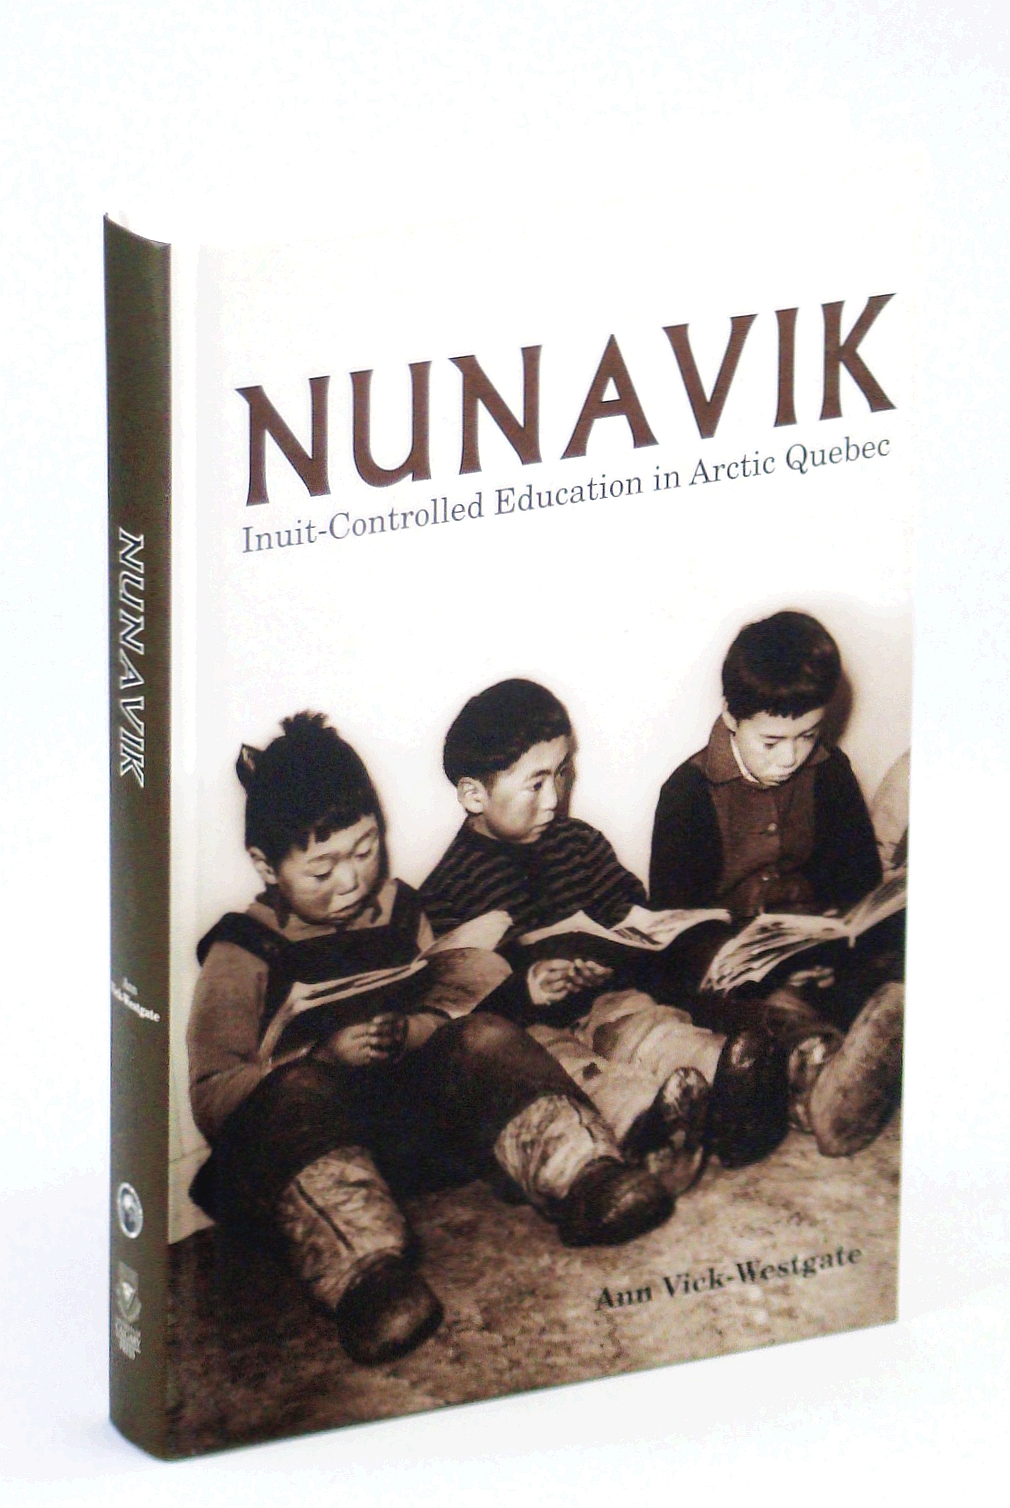 Image for Nunavik: Inuit-Controlled Education in Arctic Quebec